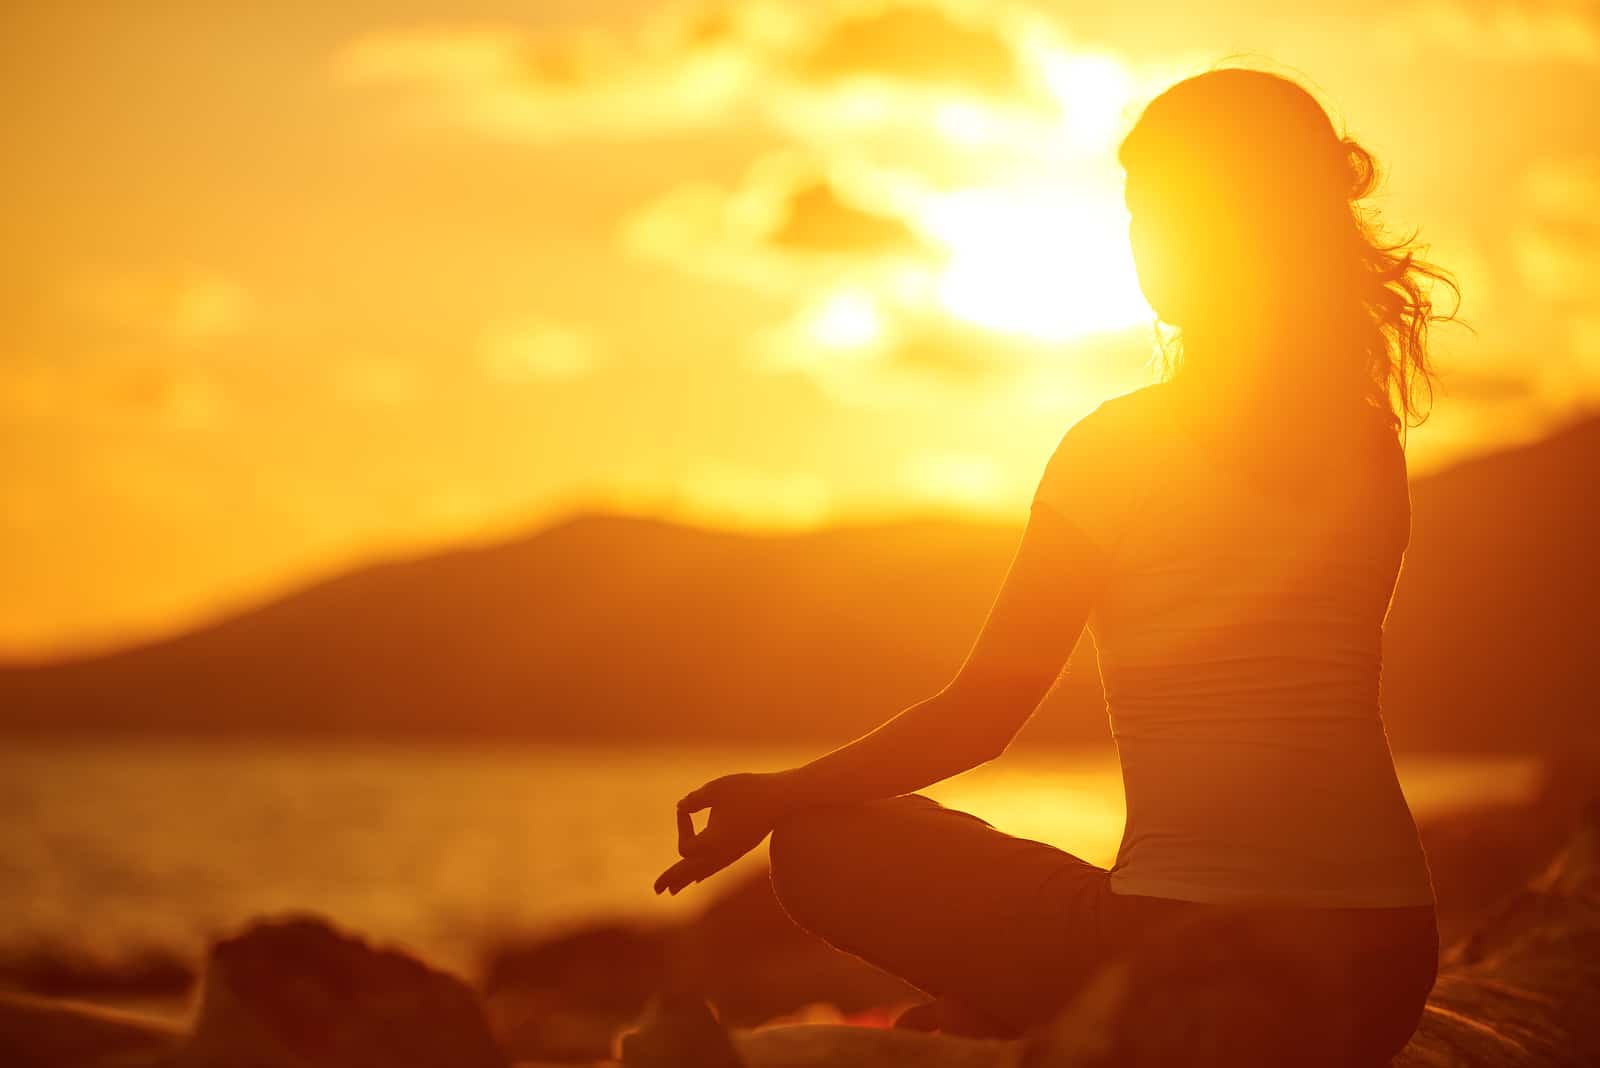 Woman Meditating In Lotus Pose On The Beach At Sunset